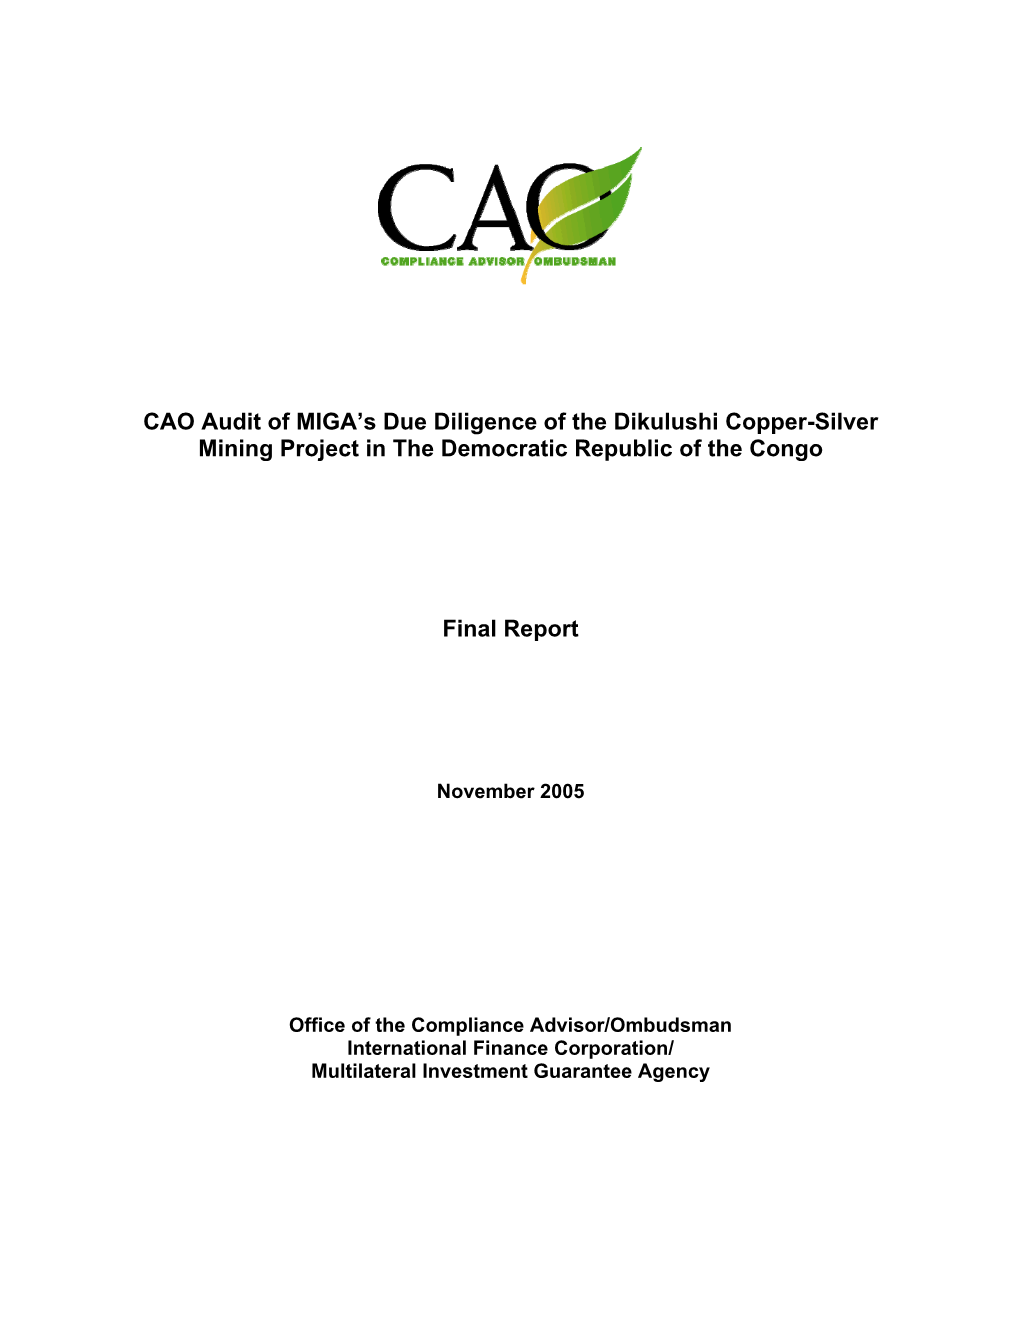 CAO Audit of MIGA's Due Diligence of the Dikulushi Copper-Silver Mining